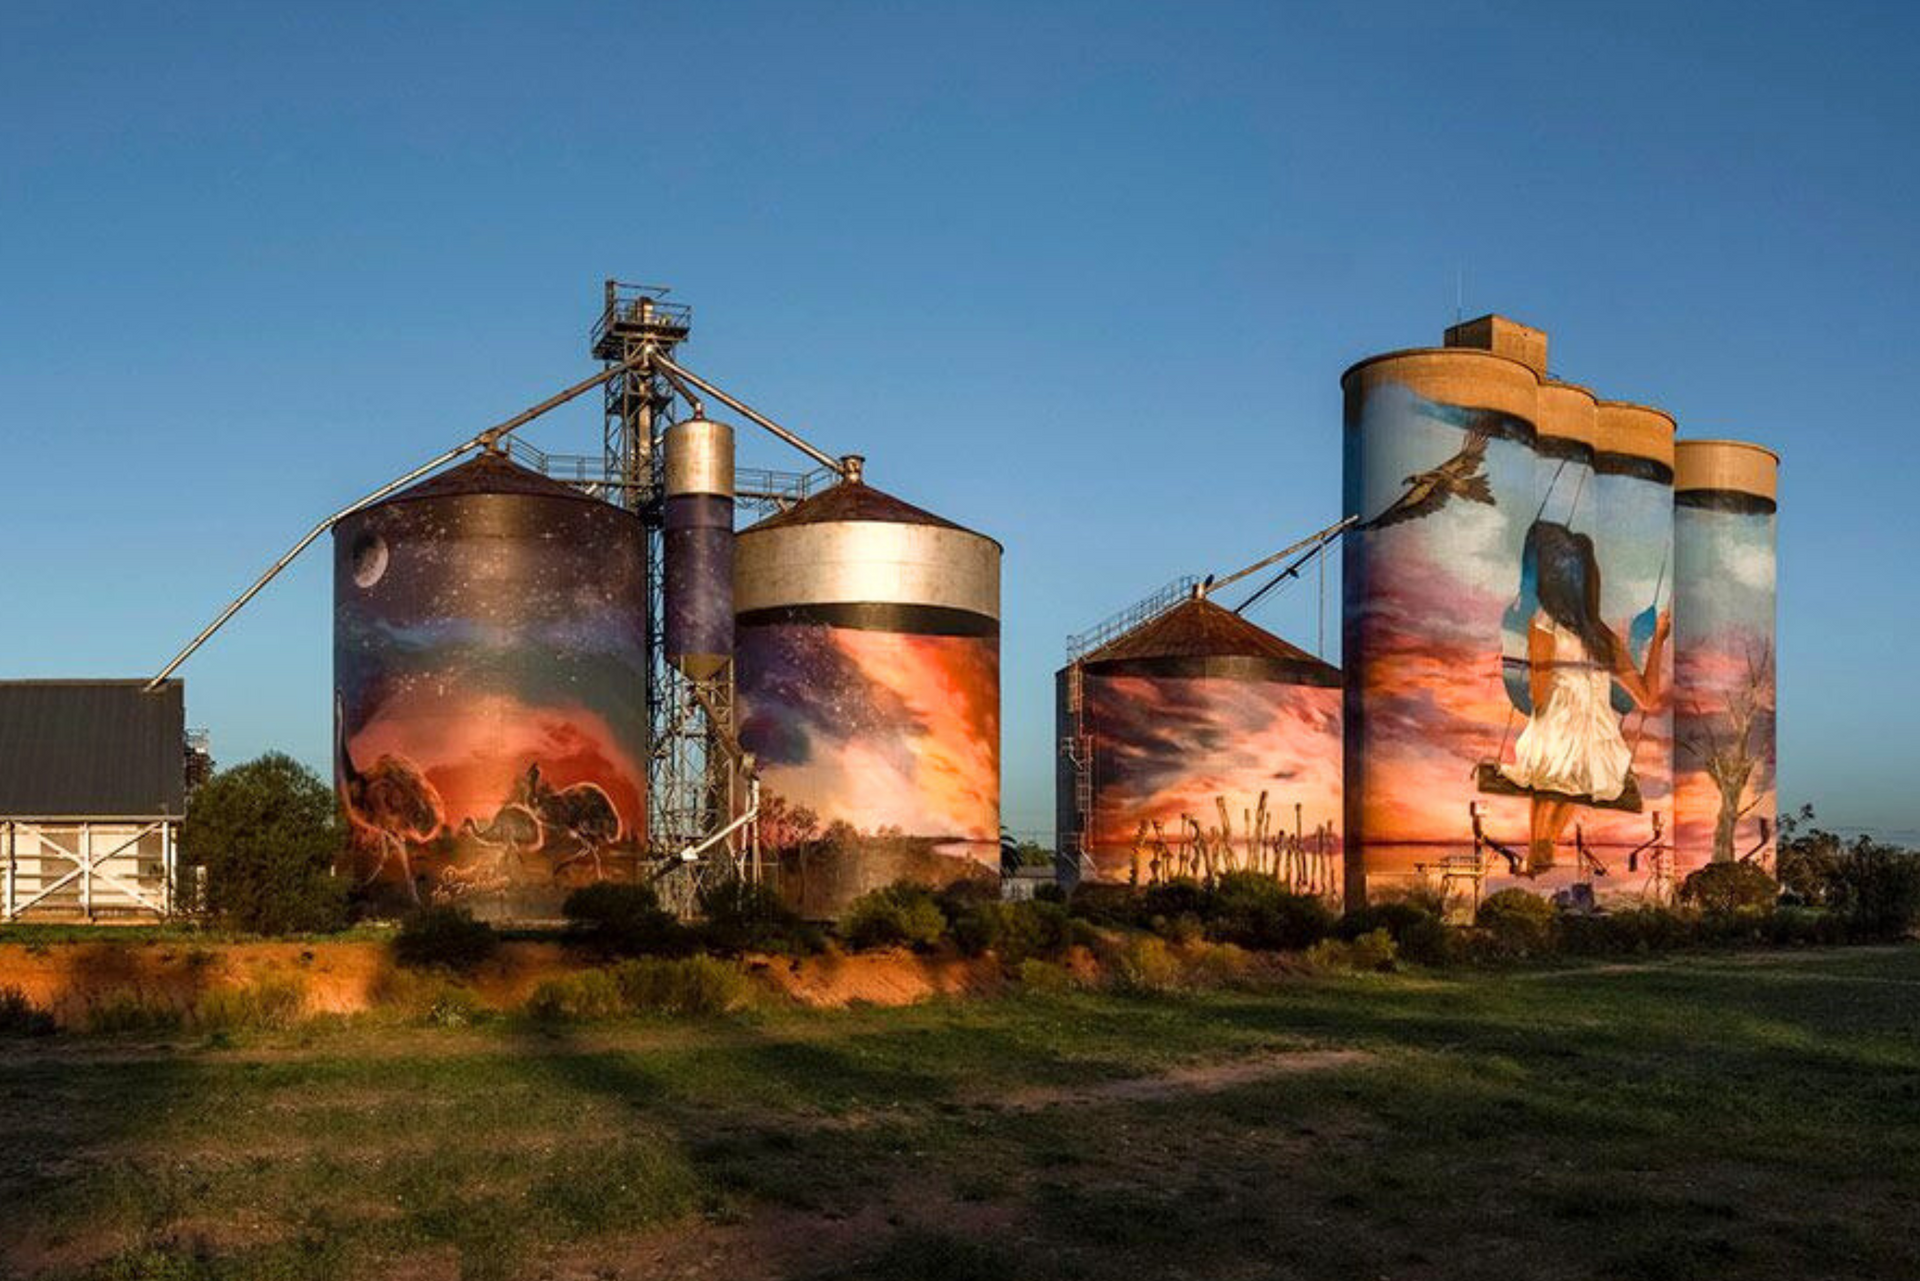 A group of silos with paintings on them in a field.